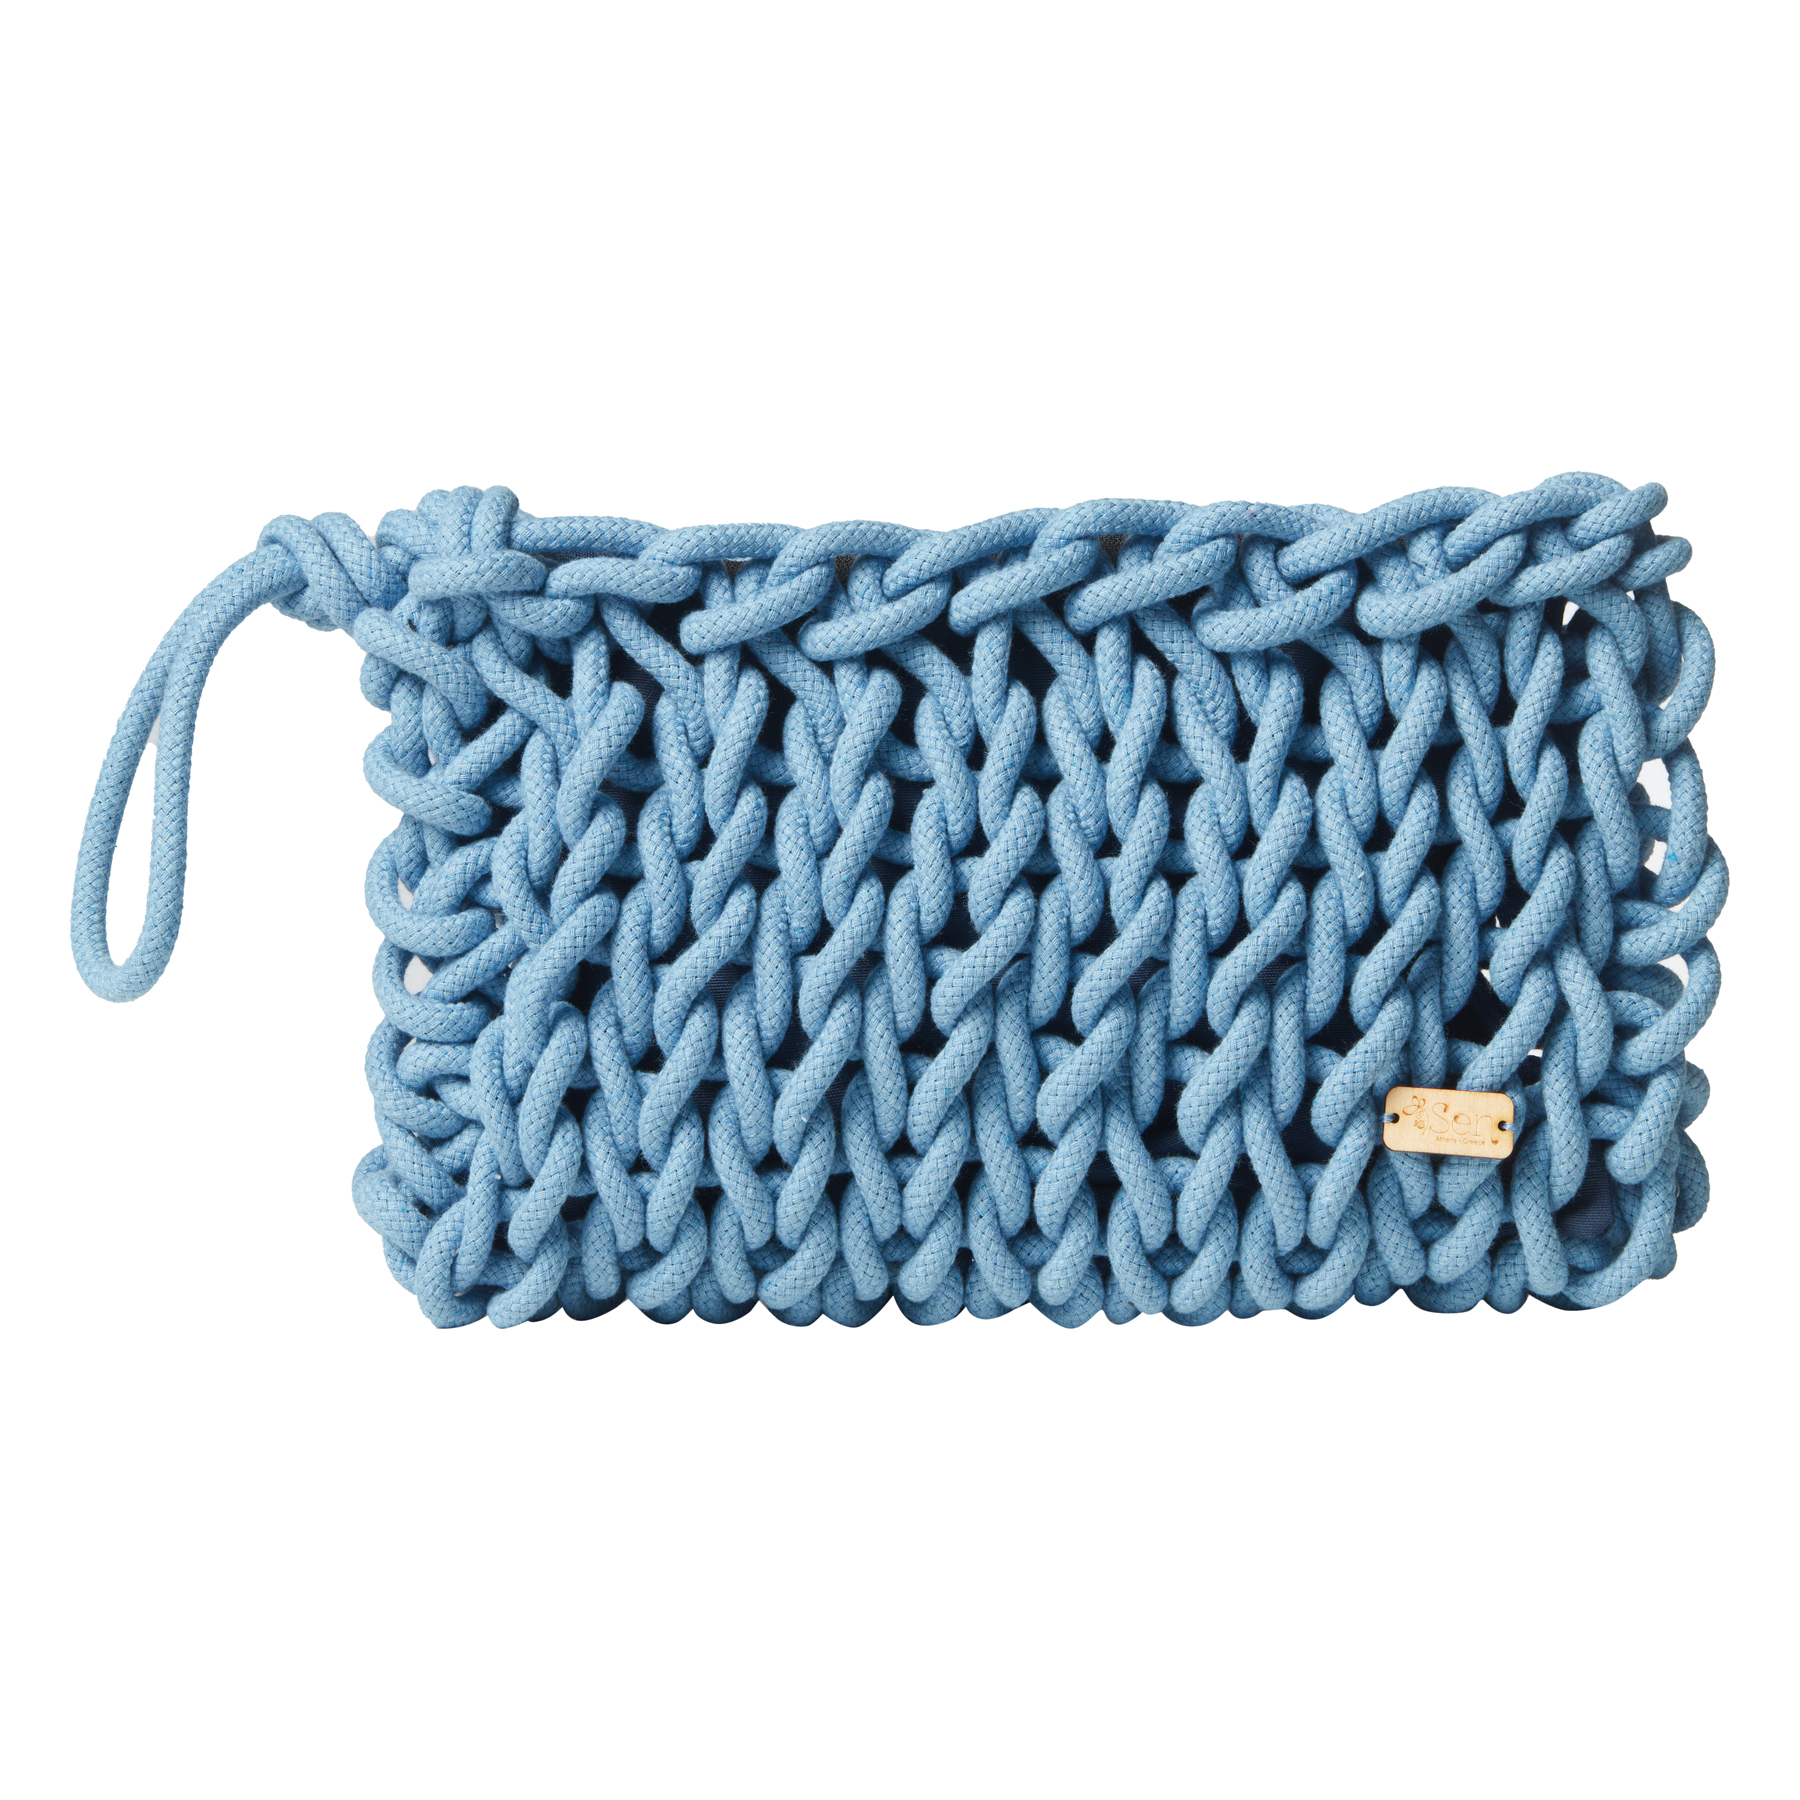 handmade bulky knitted clutch bag made of cotton ropes in ocean blue